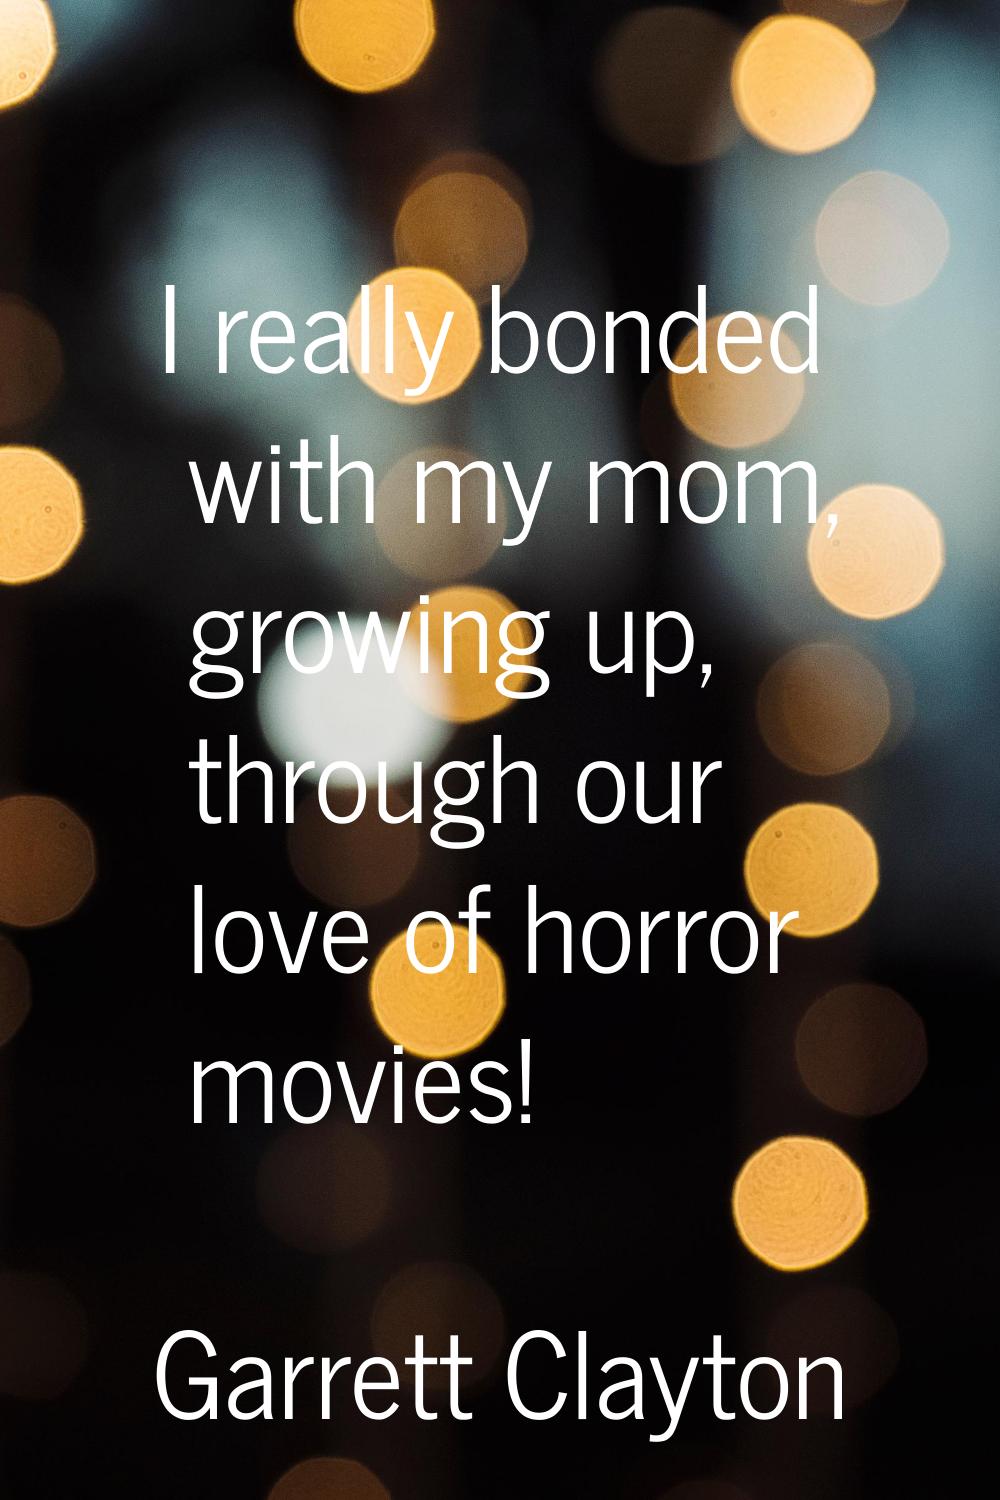 I really bonded with my mom, growing up, through our love of horror movies!